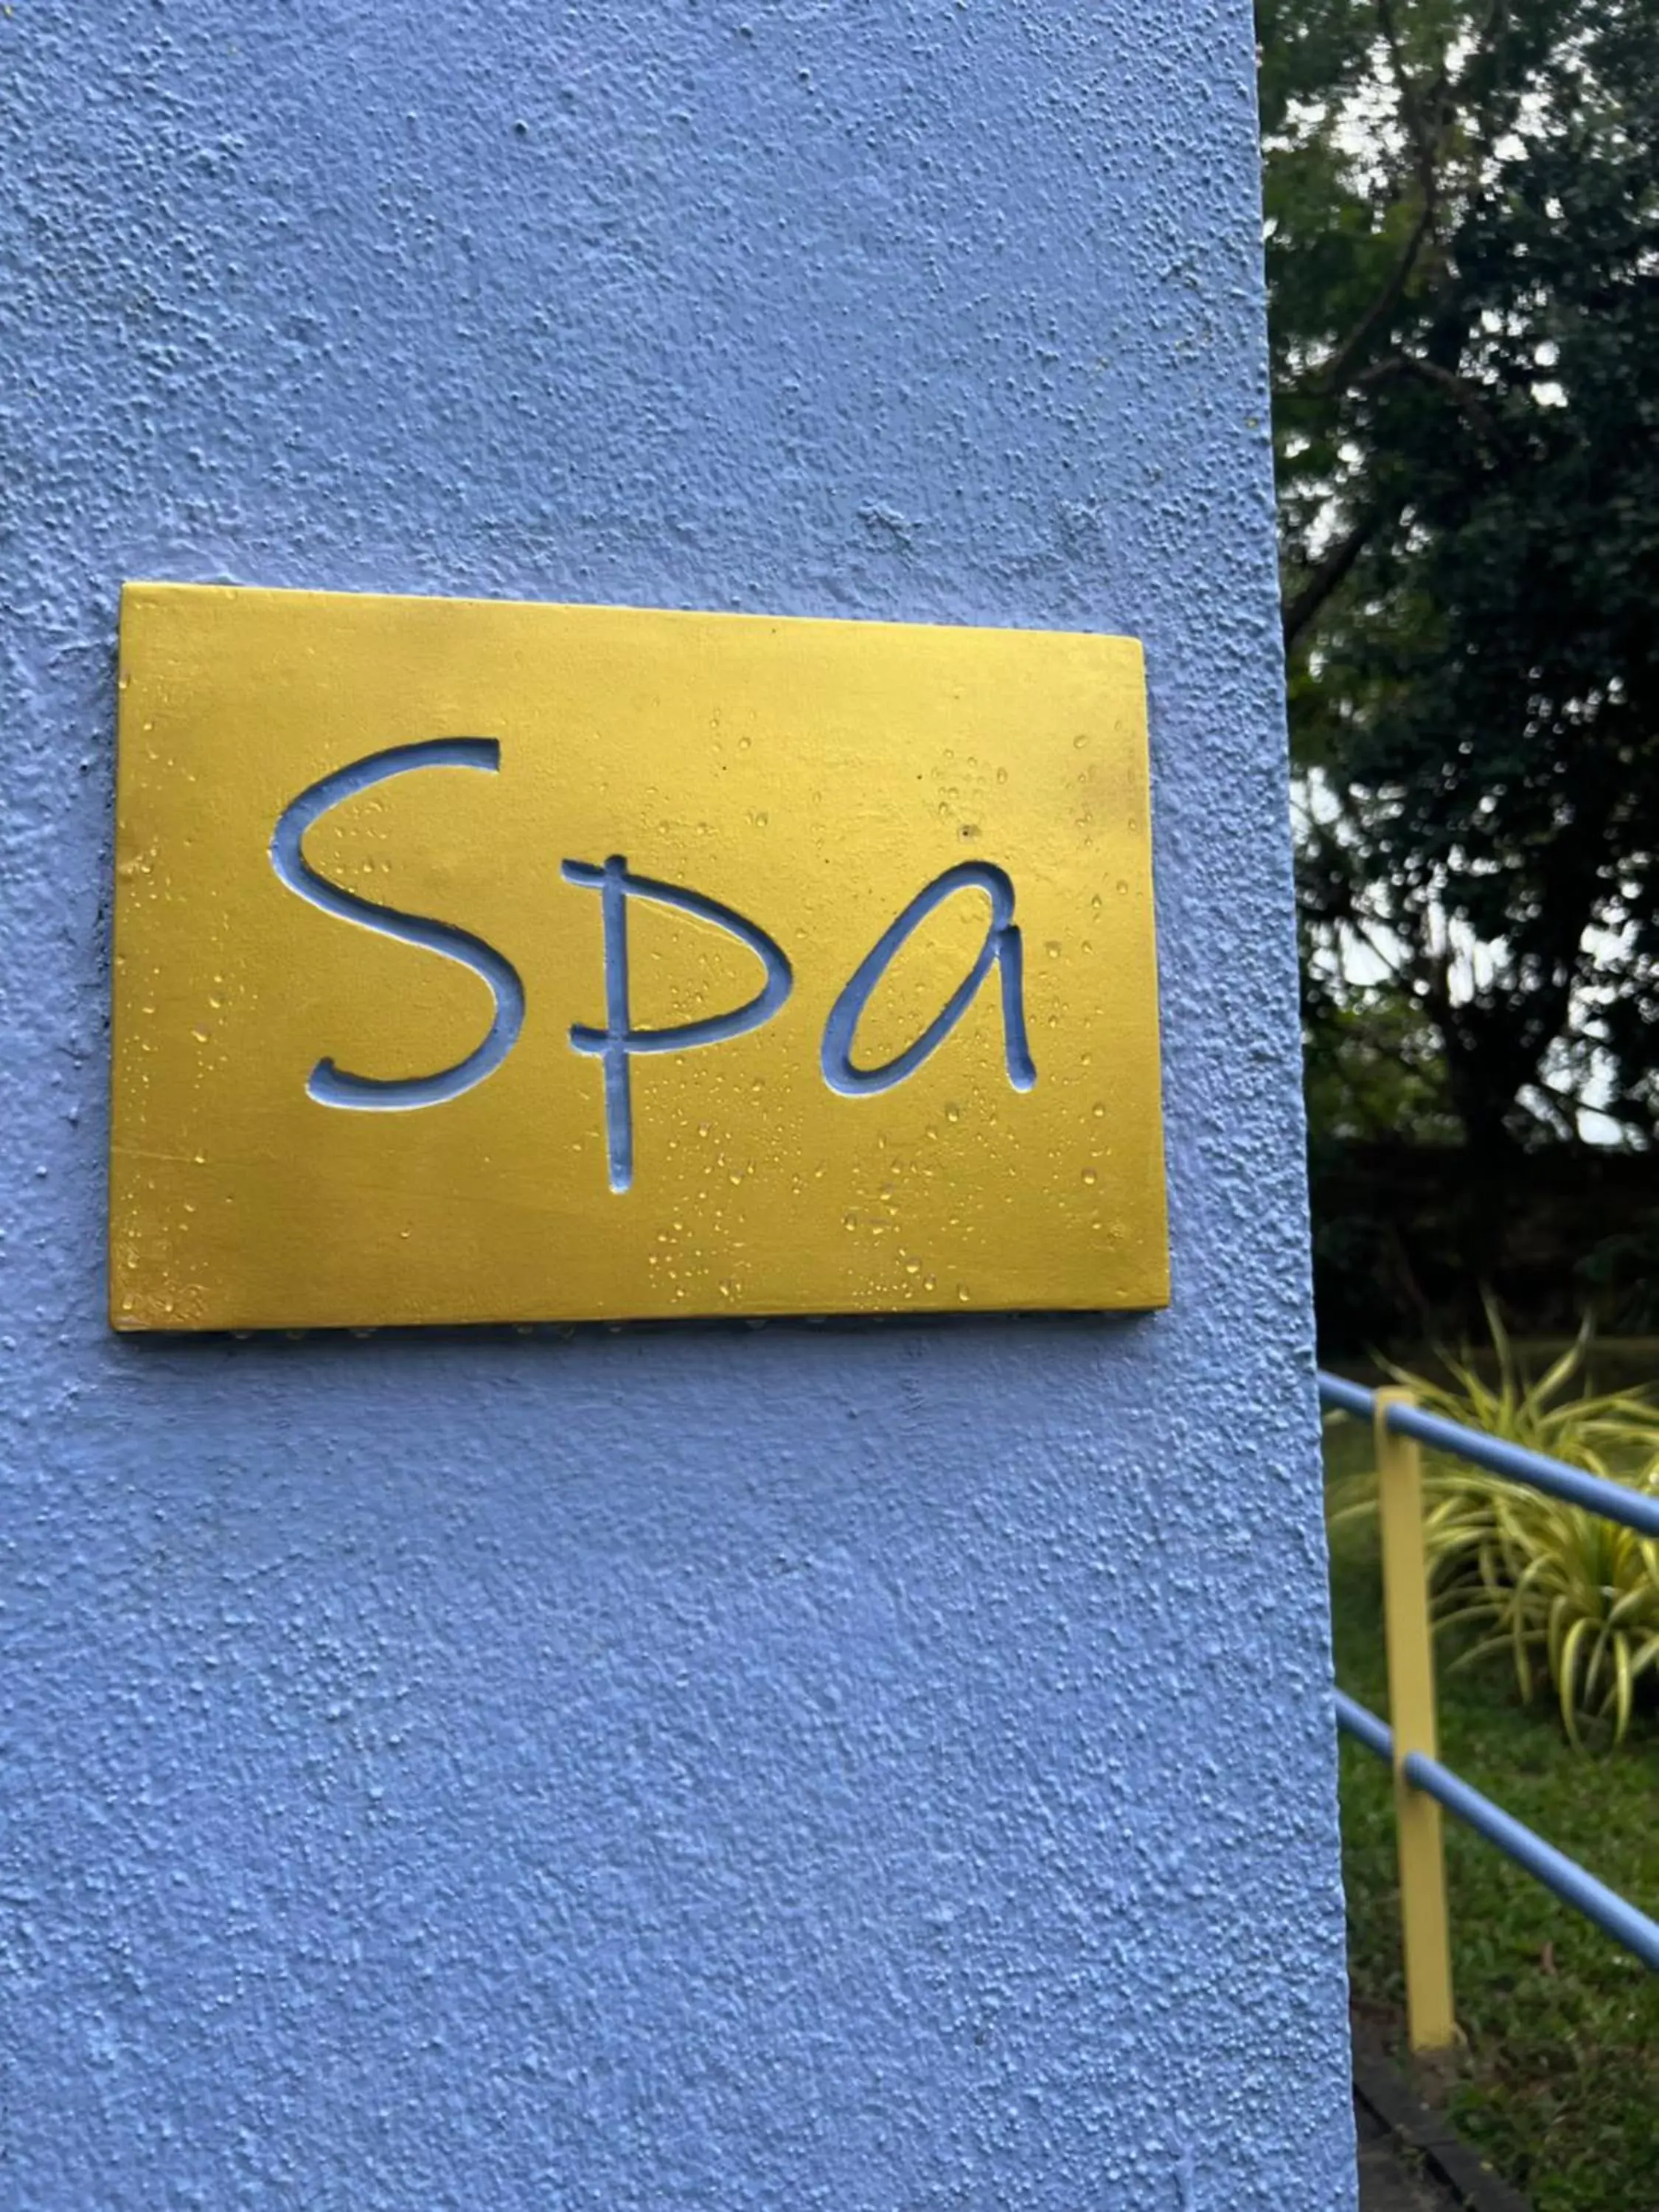 Spa and wellness centre/facilities, Property Logo/Sign in Buckingham Place